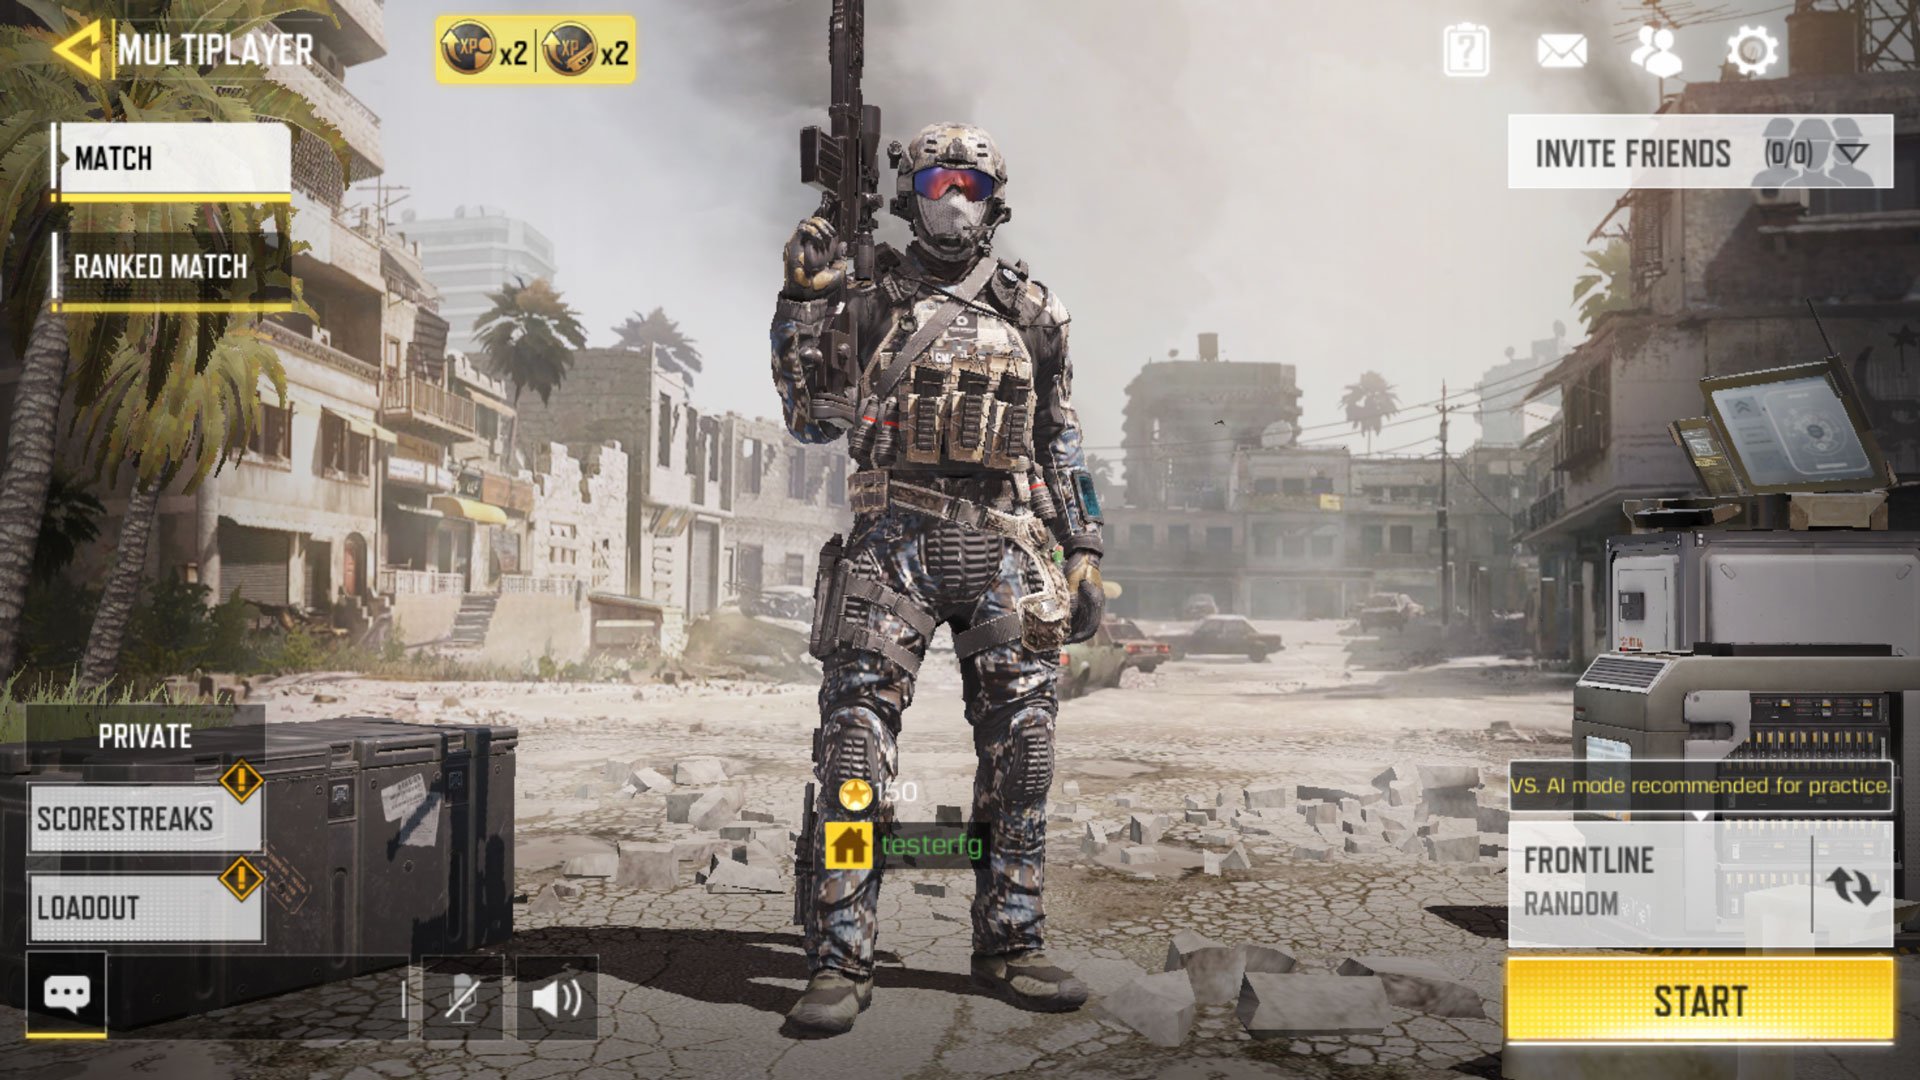 Controller support coming to Call of Duty: Mobile 'soon